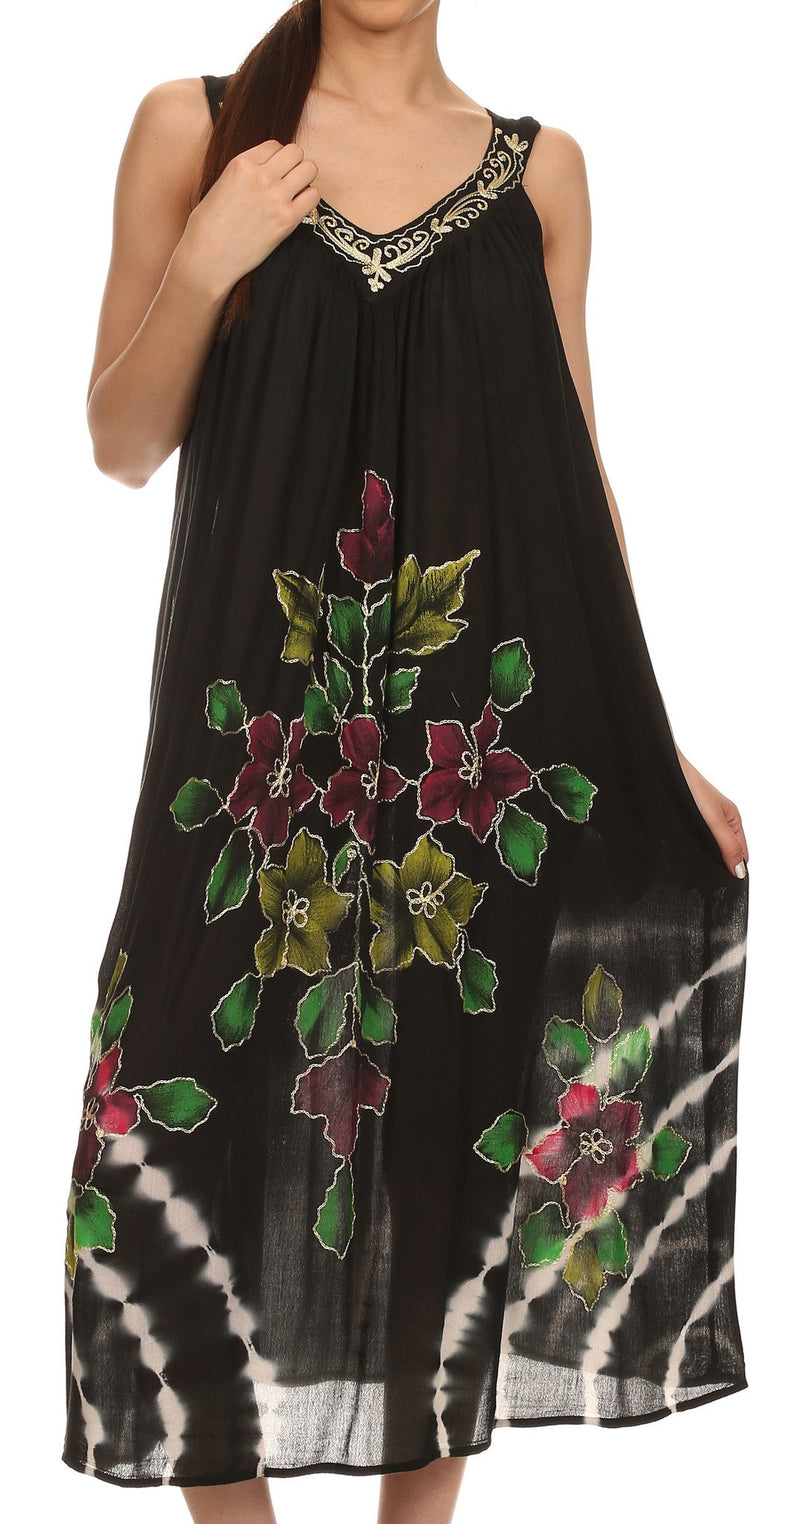 Sakkas Kira Embroidered Relaxed Fit with Pockets Tank Dress / Cover Up